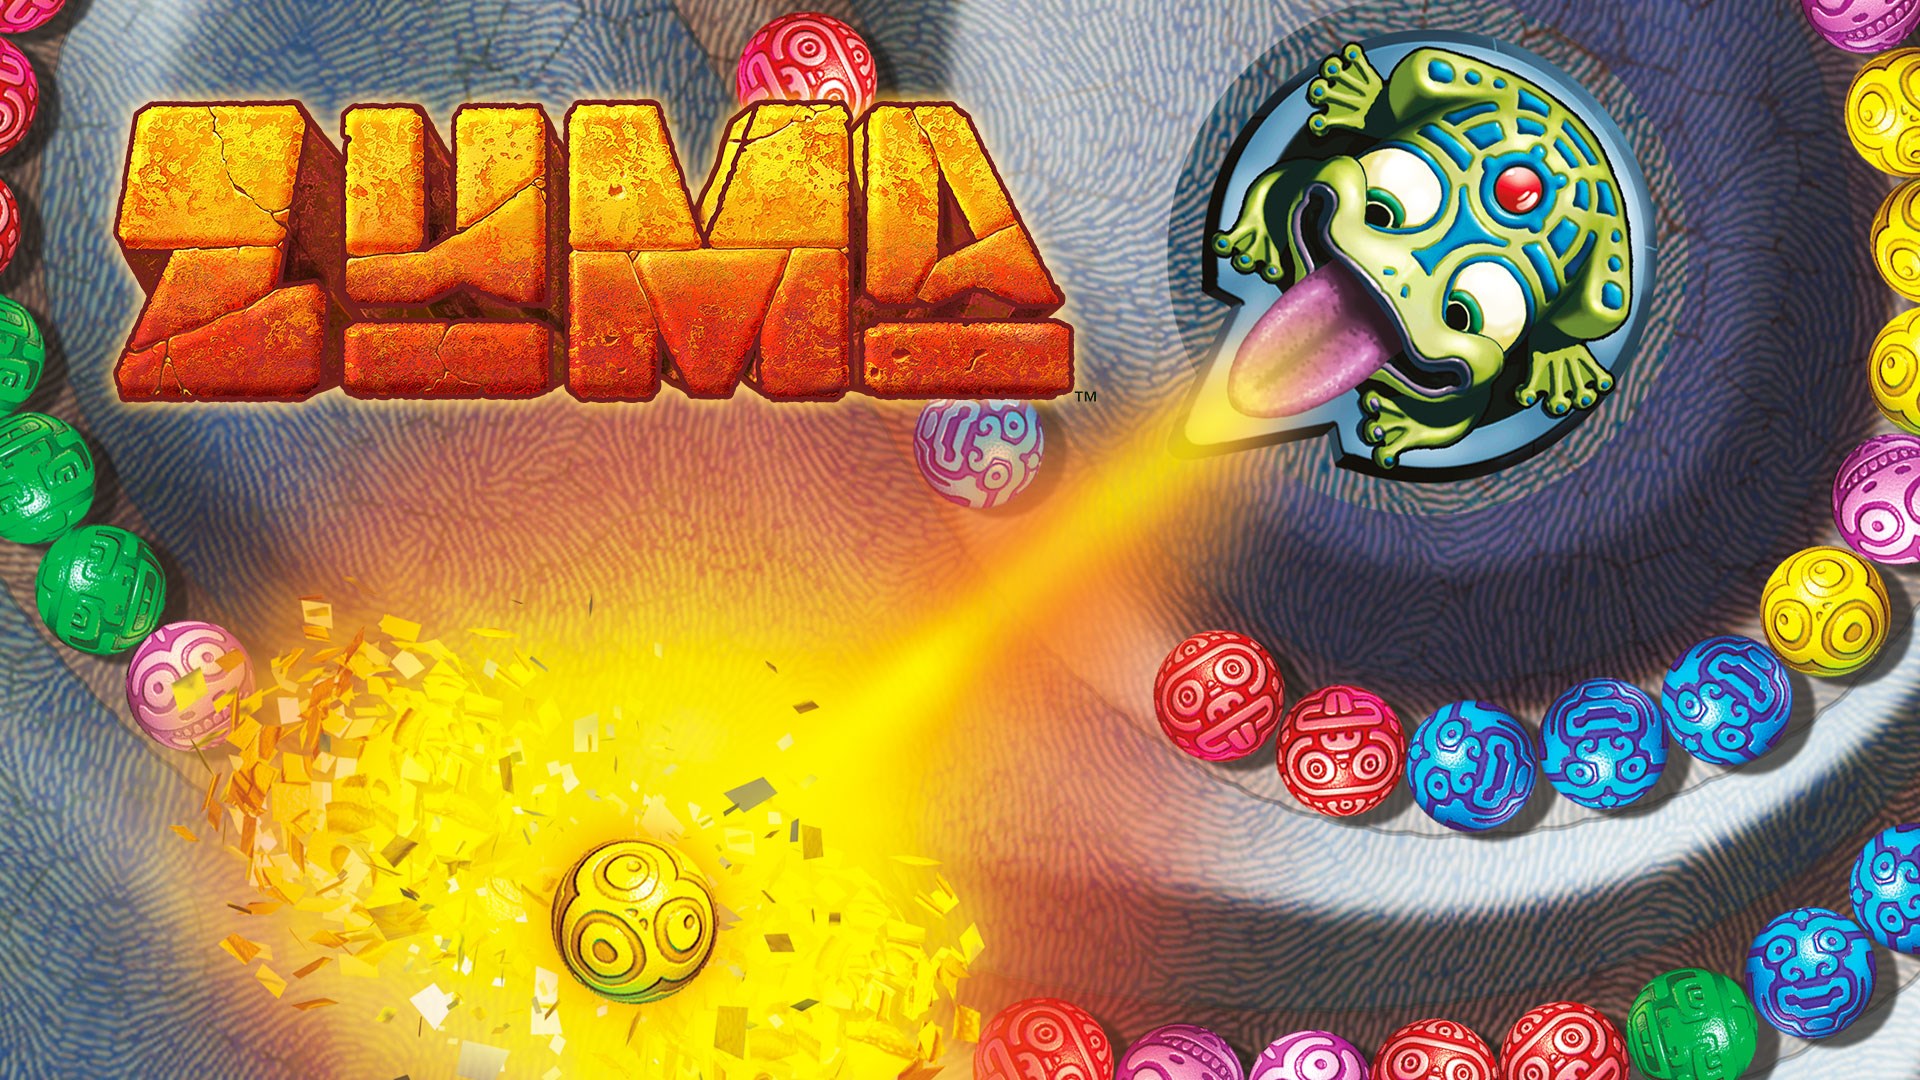 Zuma game free download in my mobile apps